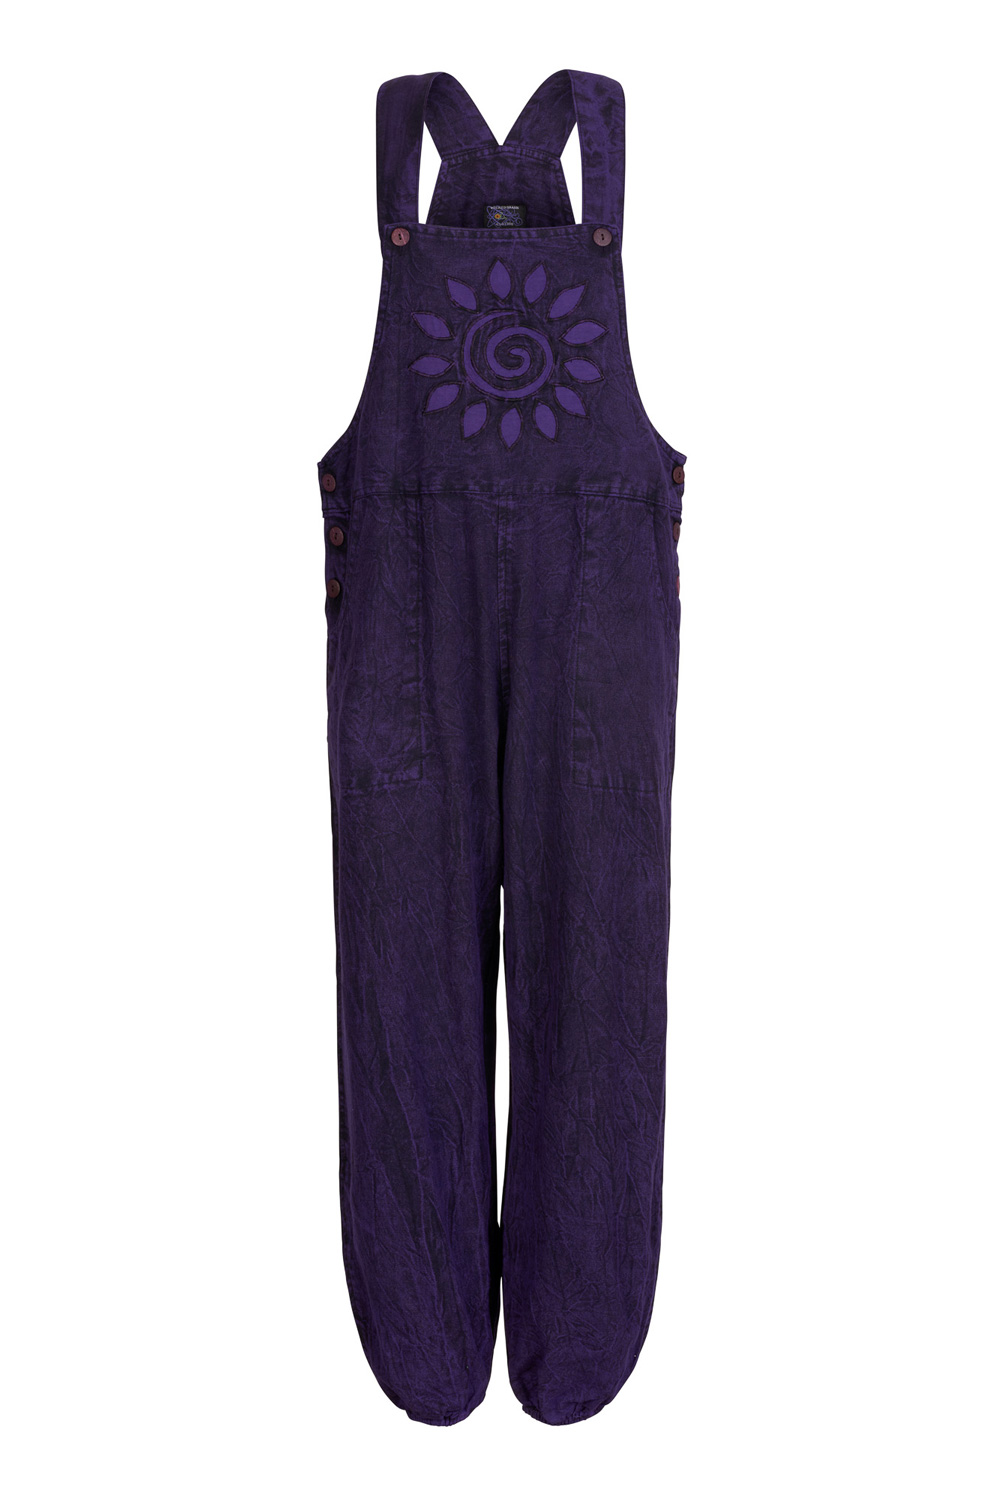 Revived purple spiral sun dungarees